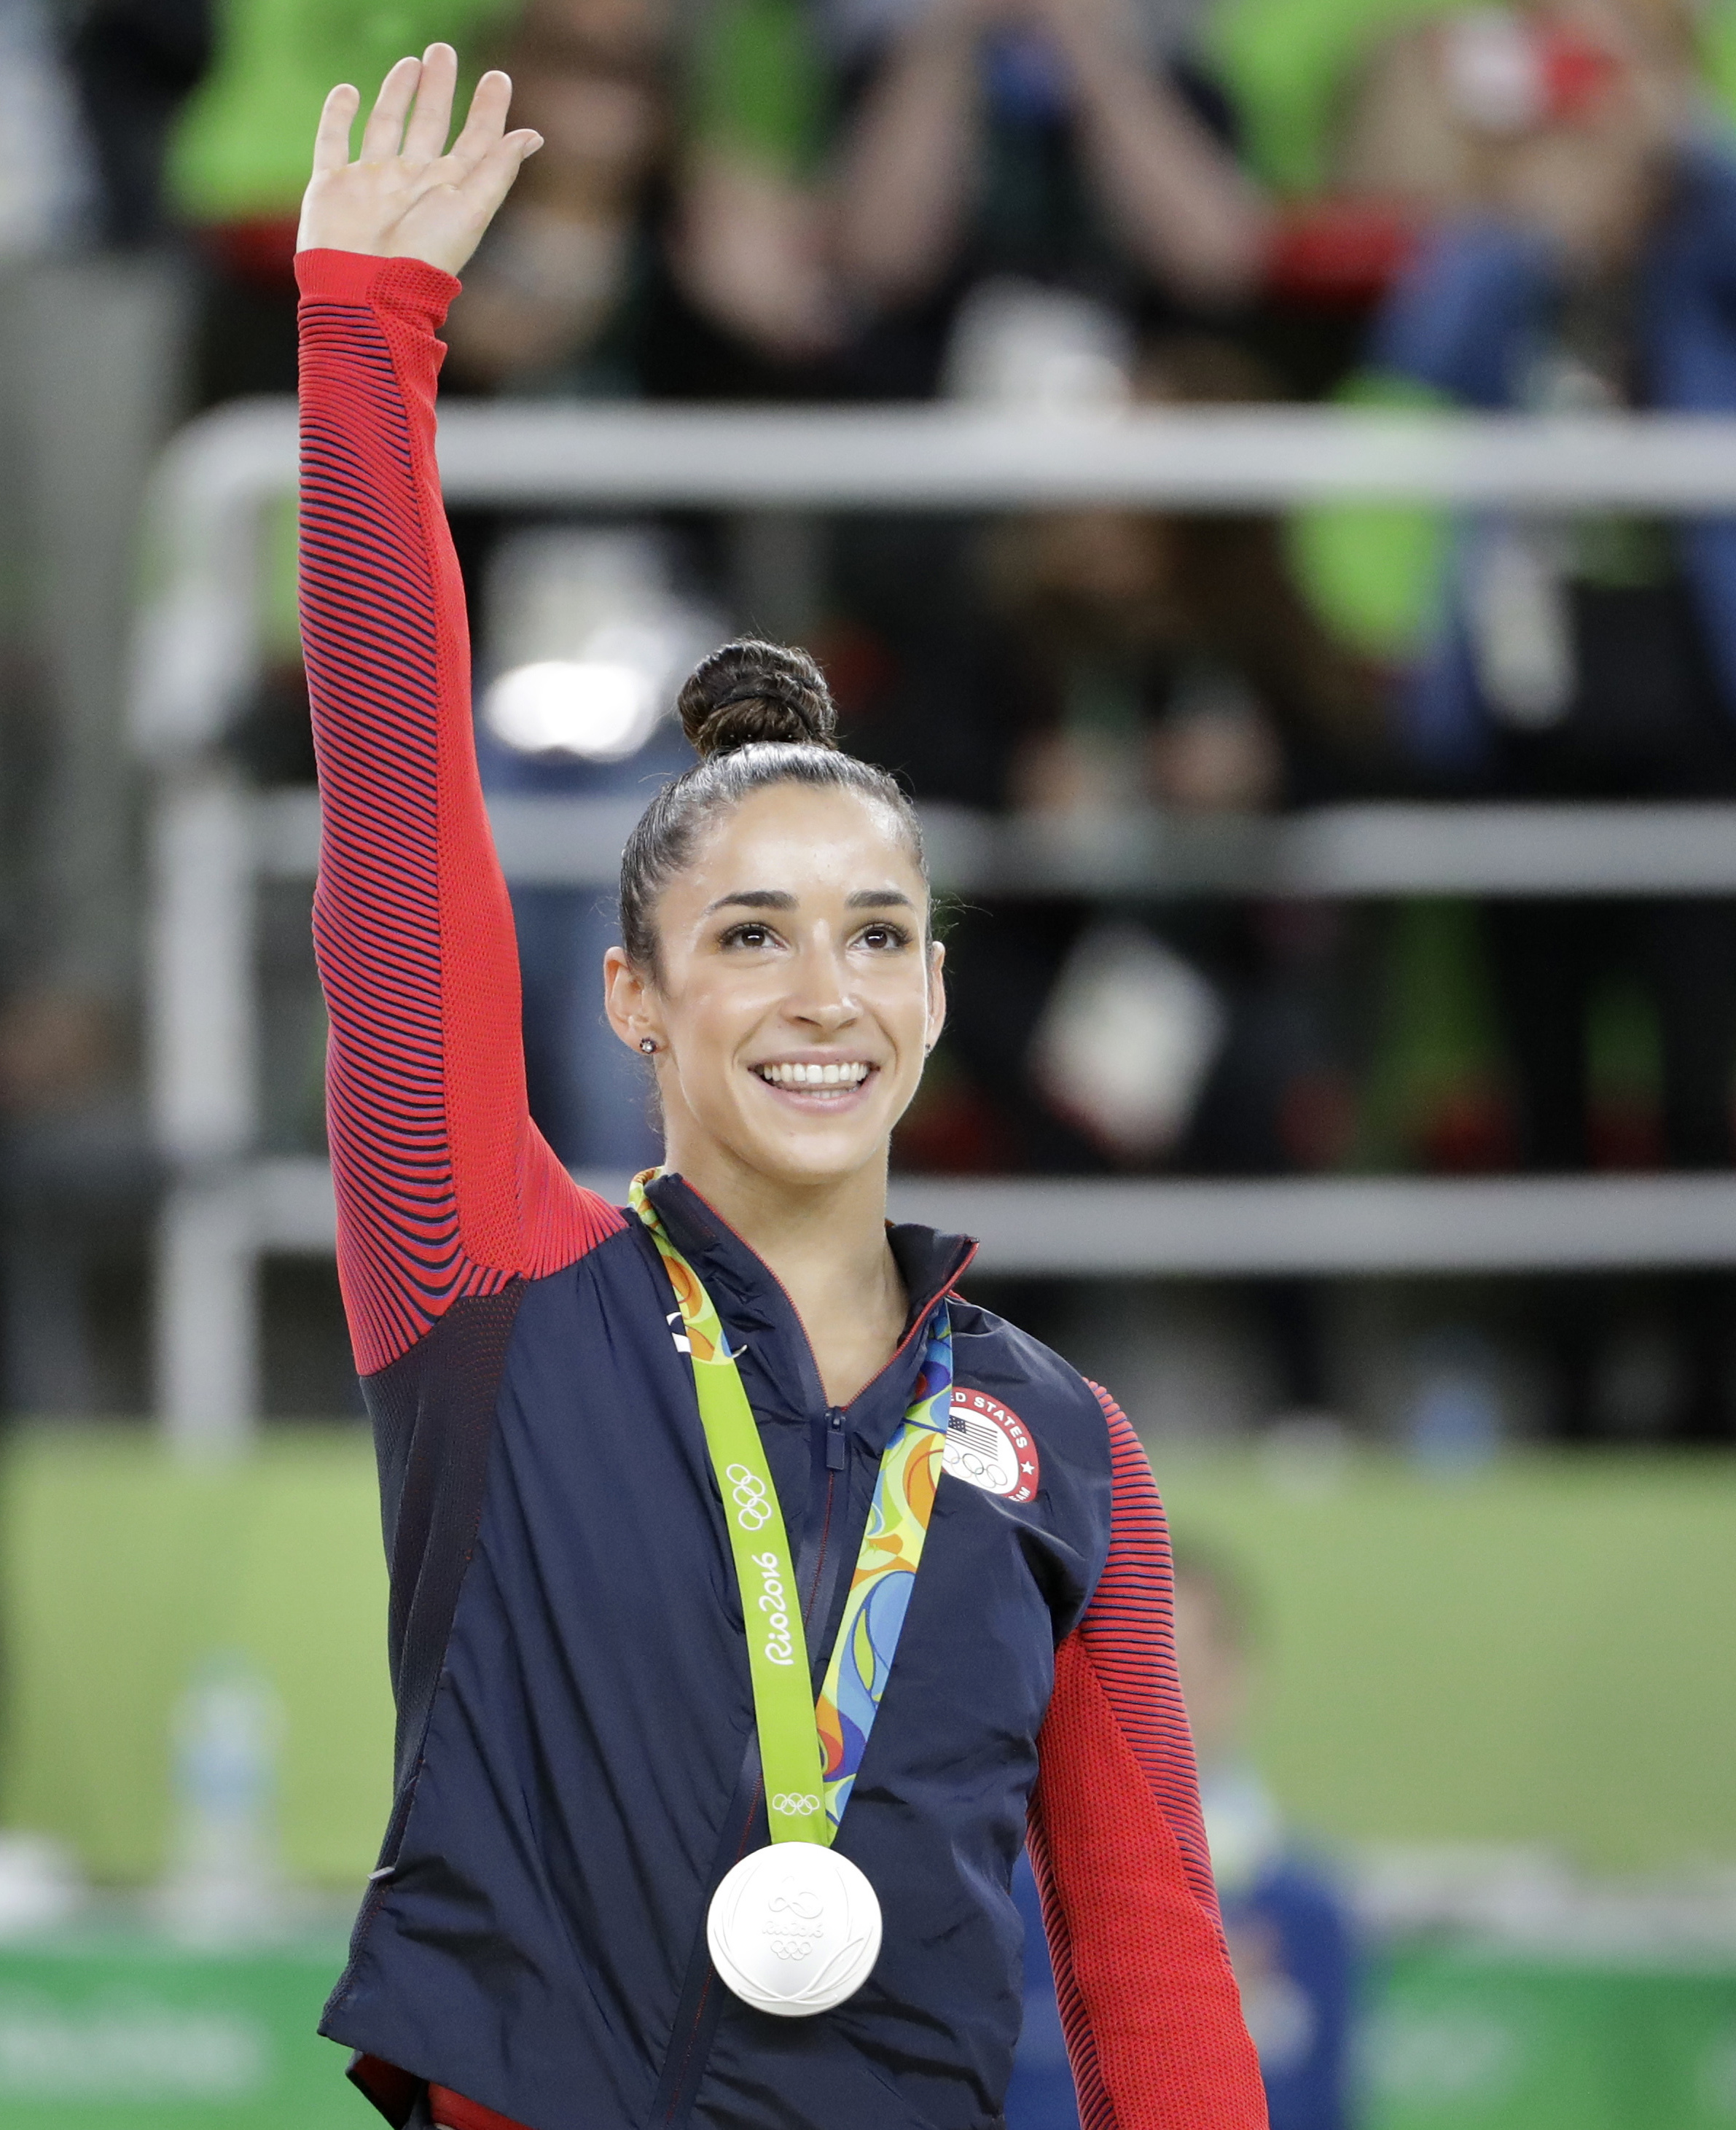 Six-time Olympic medalist Aly Raisman names the U.S. Olympic Committee and USA Gymnastics in a lawsuit this week alleging the organizations hid abuse by disgraced team doctor Larry Nassar. She is seen here at the 2016 Games in Rio de Janeiro, Brazil.
